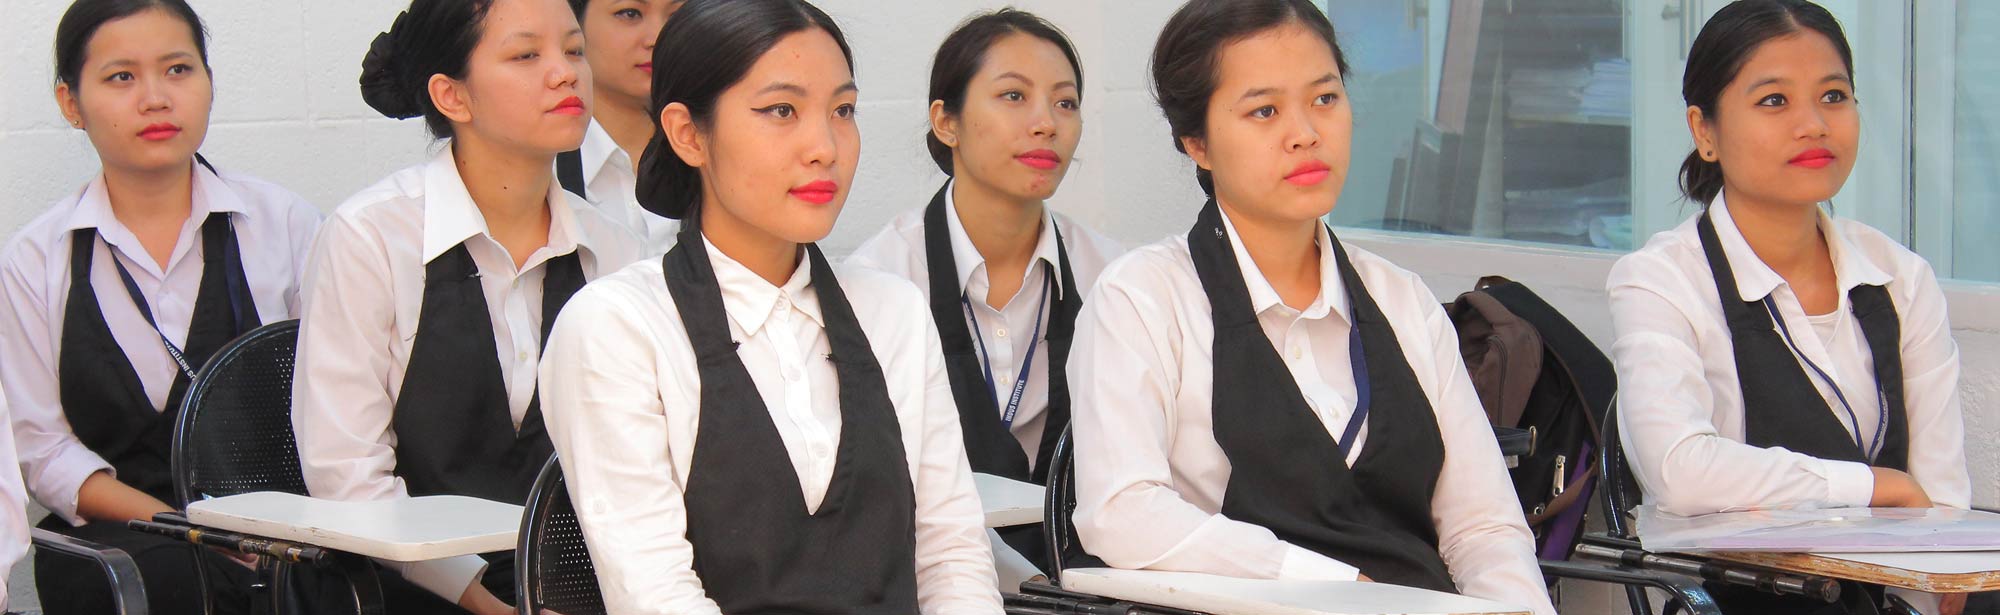 Hospitality students in training lecture